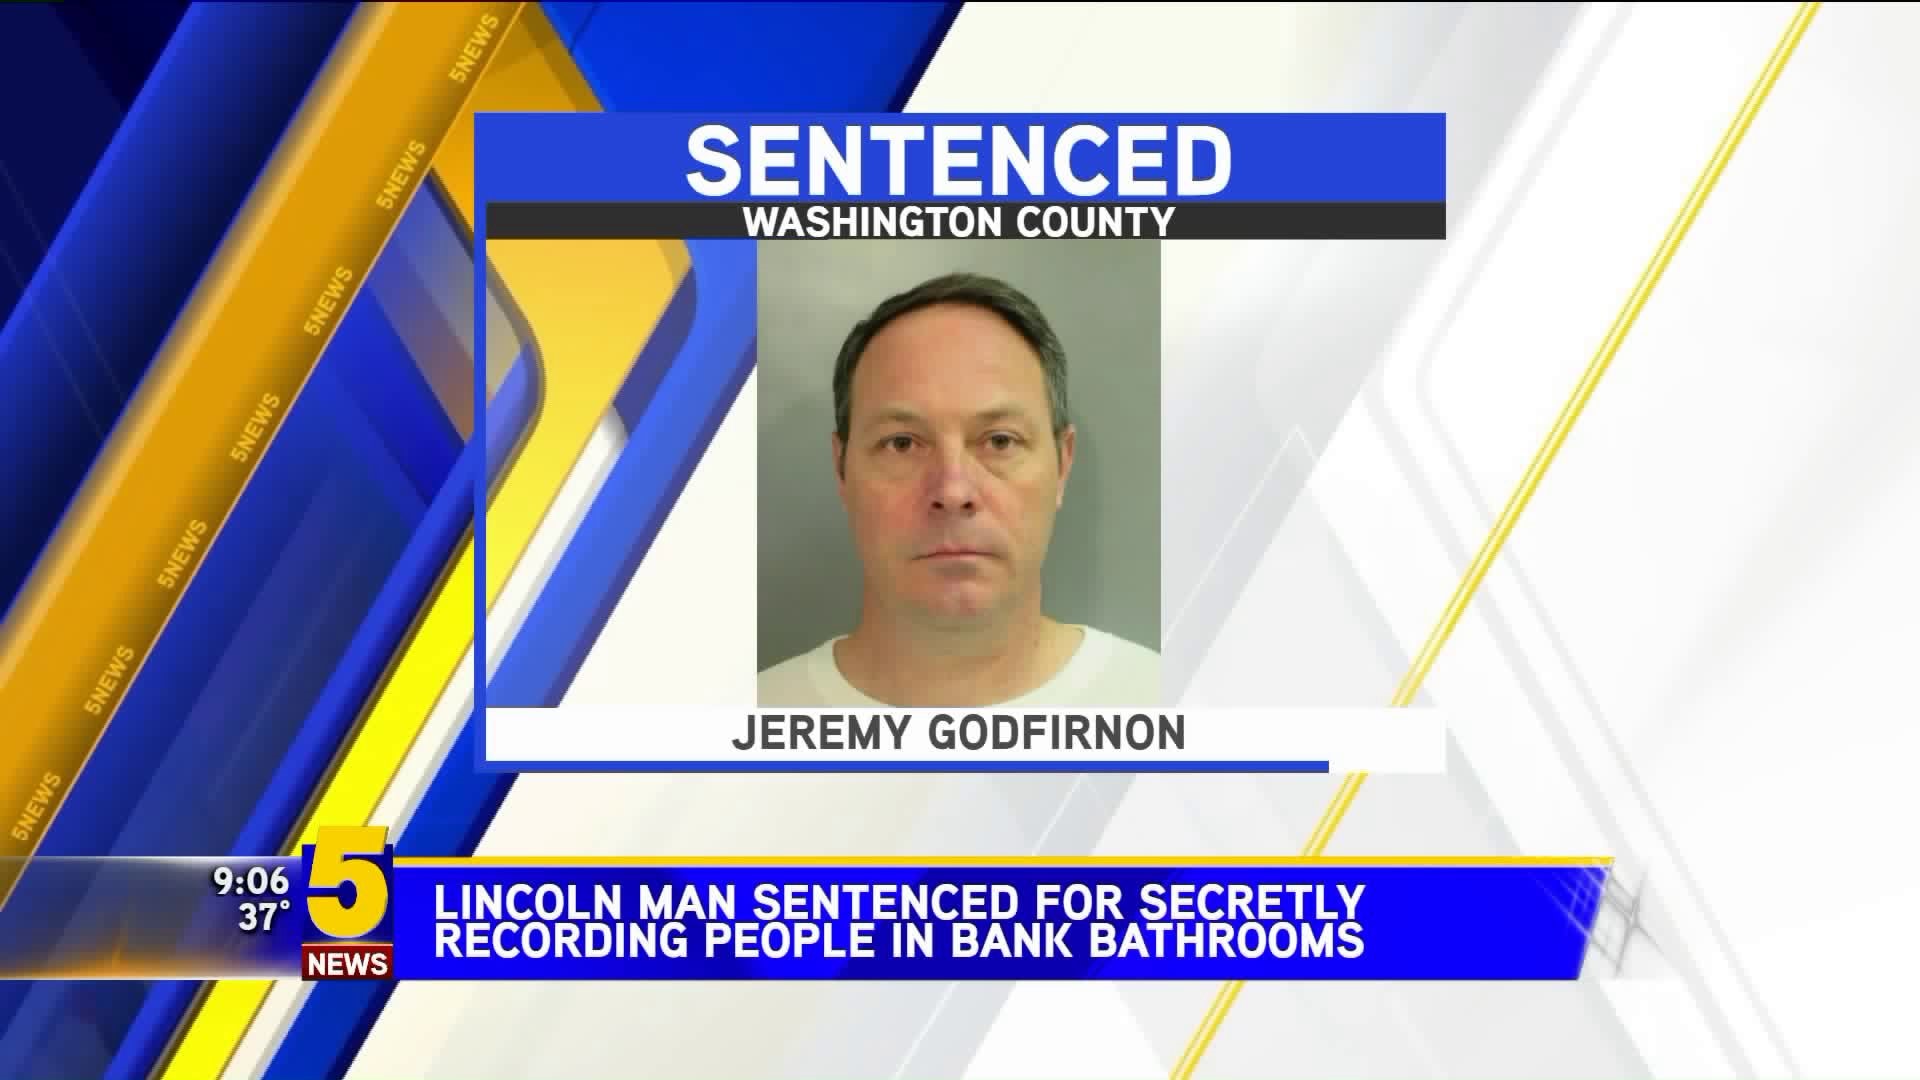 Lincoln man sentenced for secretly recording people in bank bathrooms